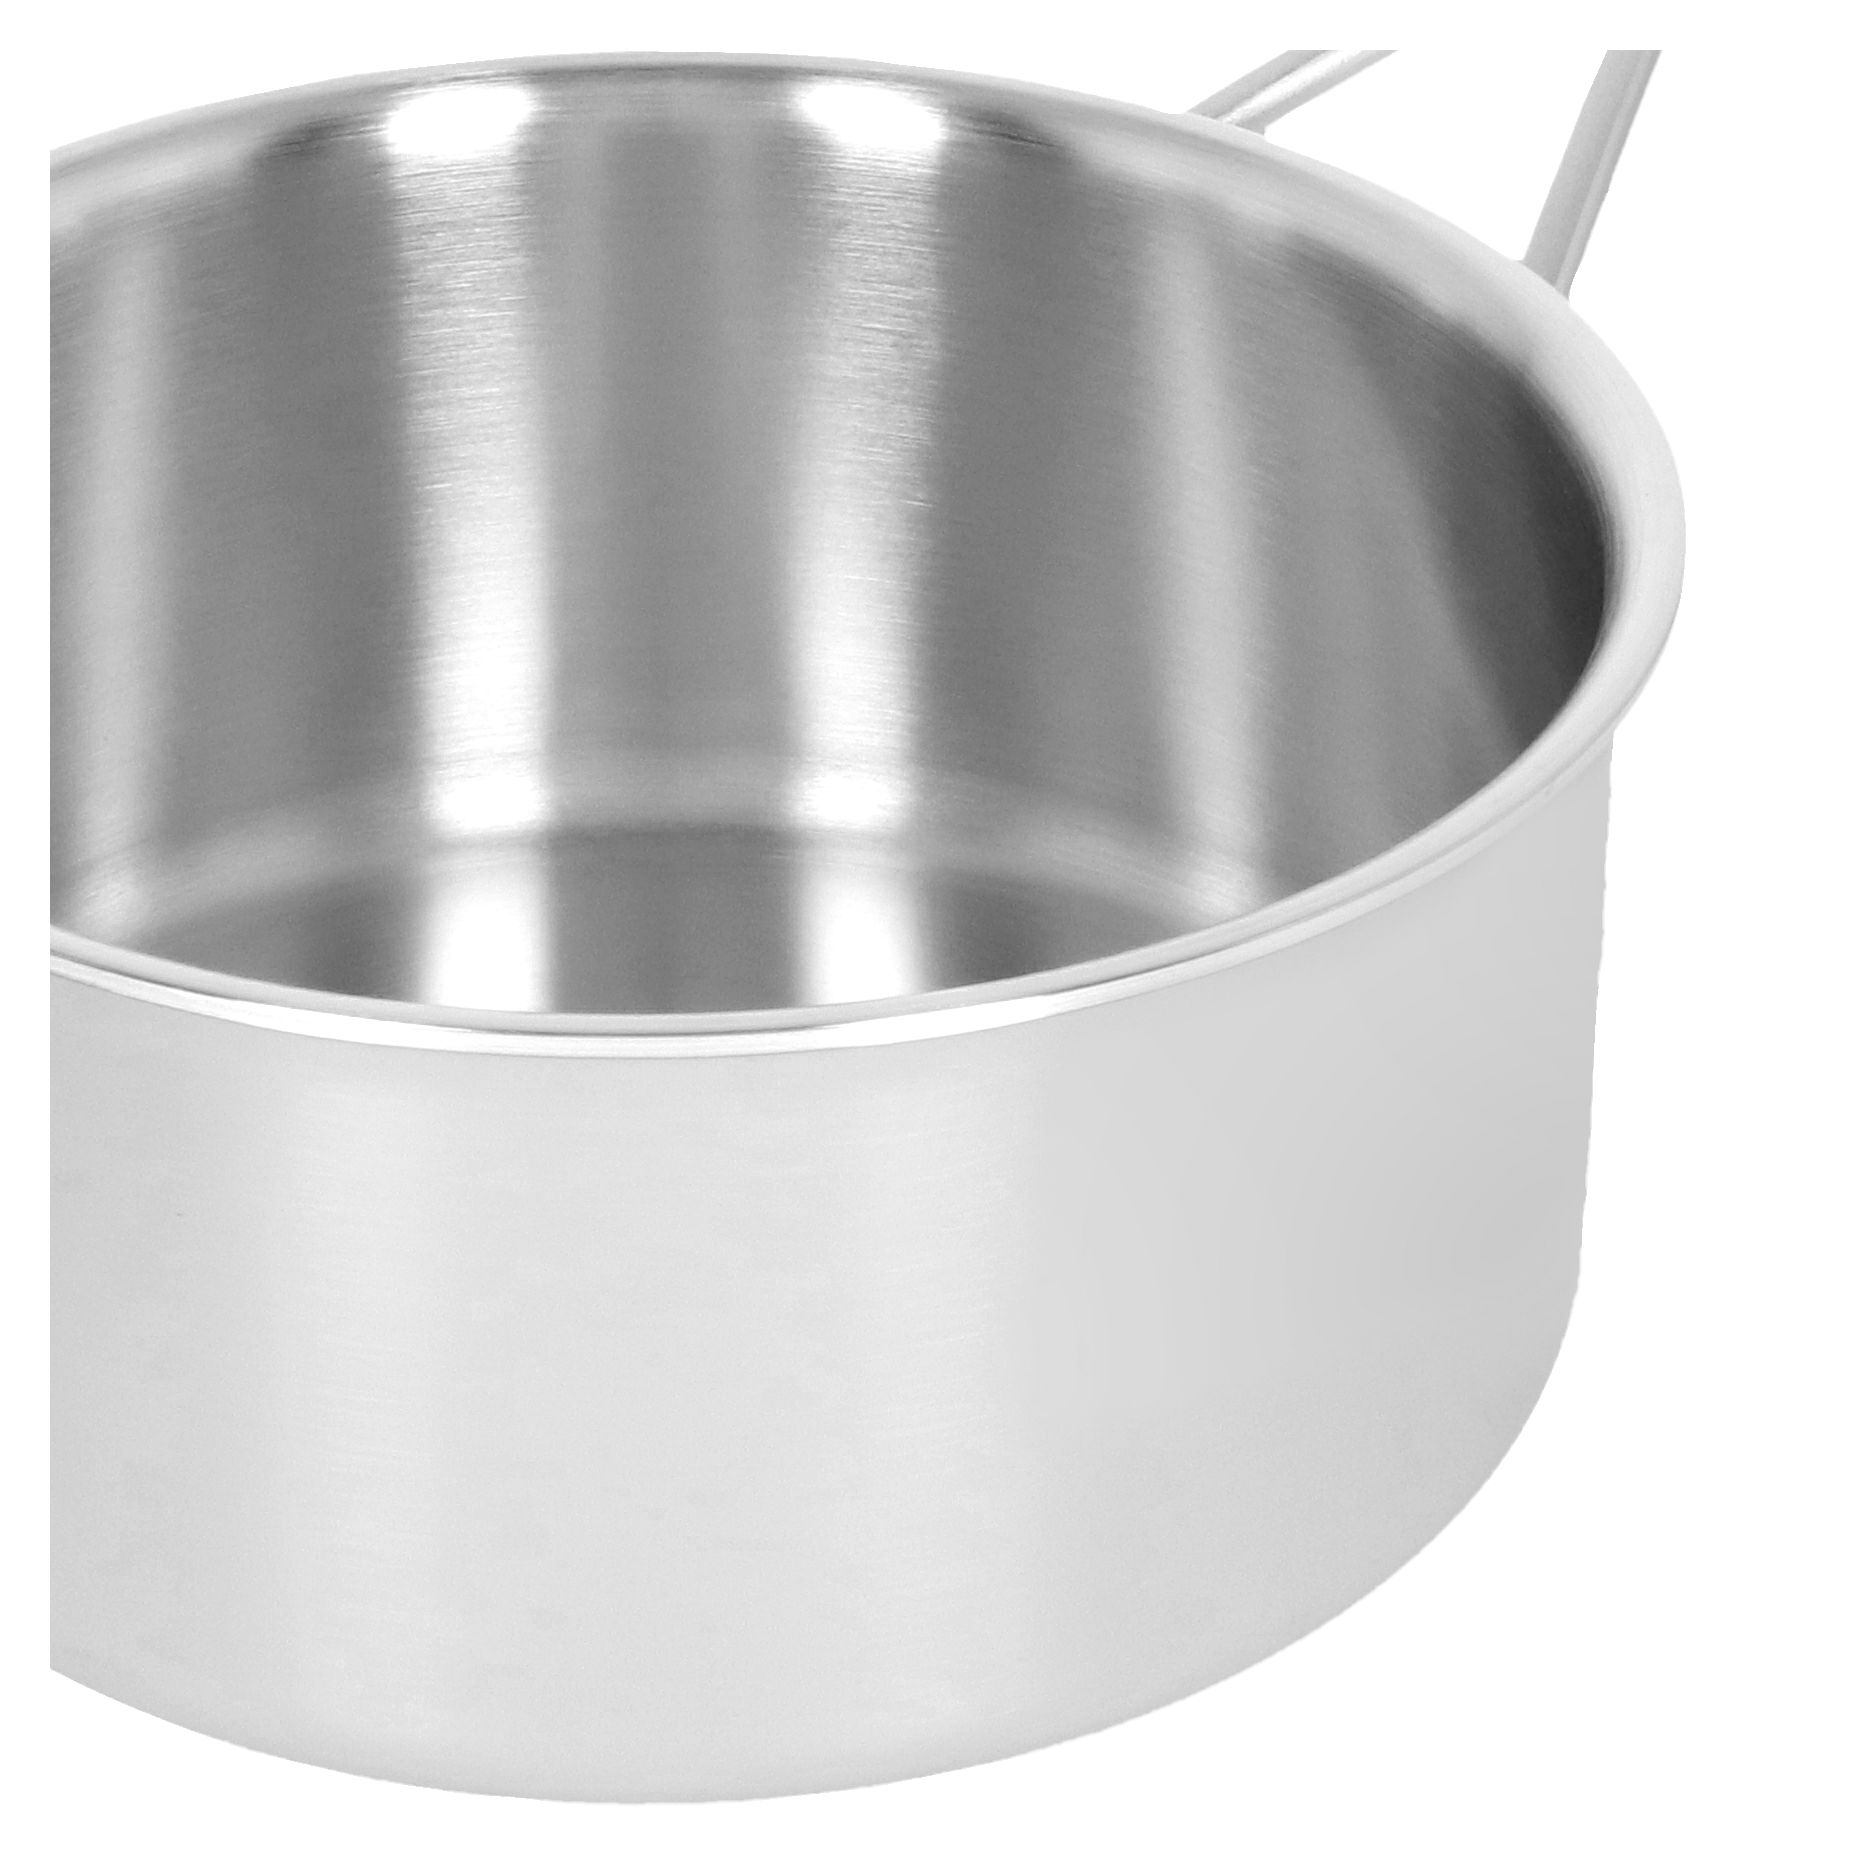 Demeyere Industry 5-Ply Sauté Pan, 3QT, Made in Belgium, Stainless